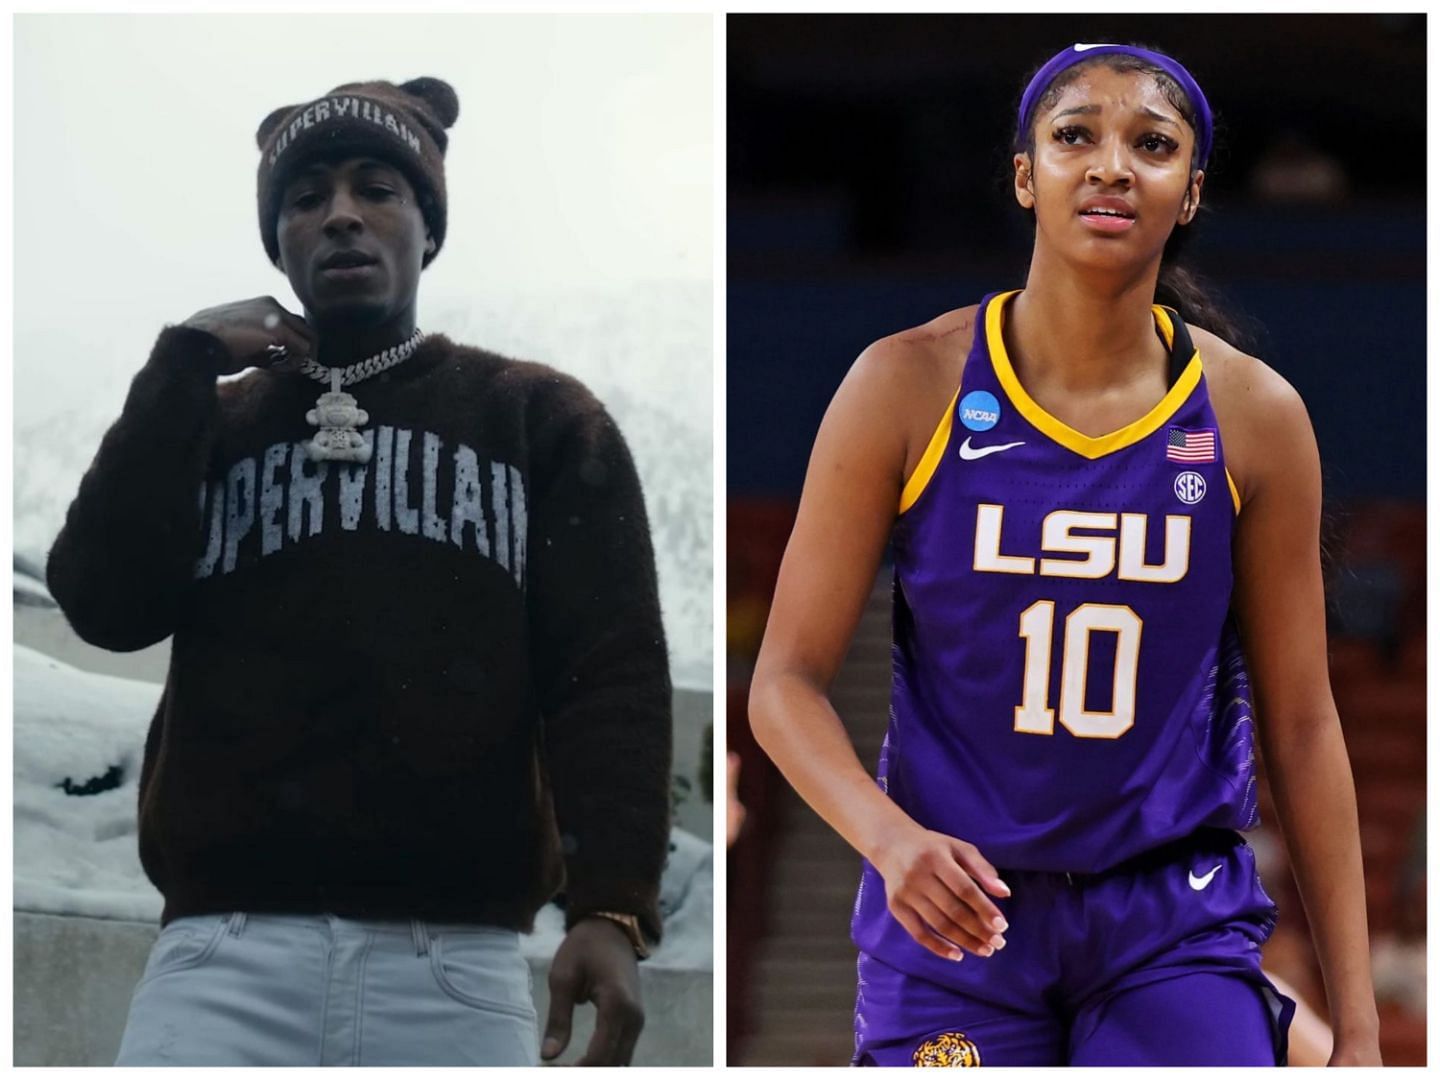 Rapper NBA Youngboy and LSU